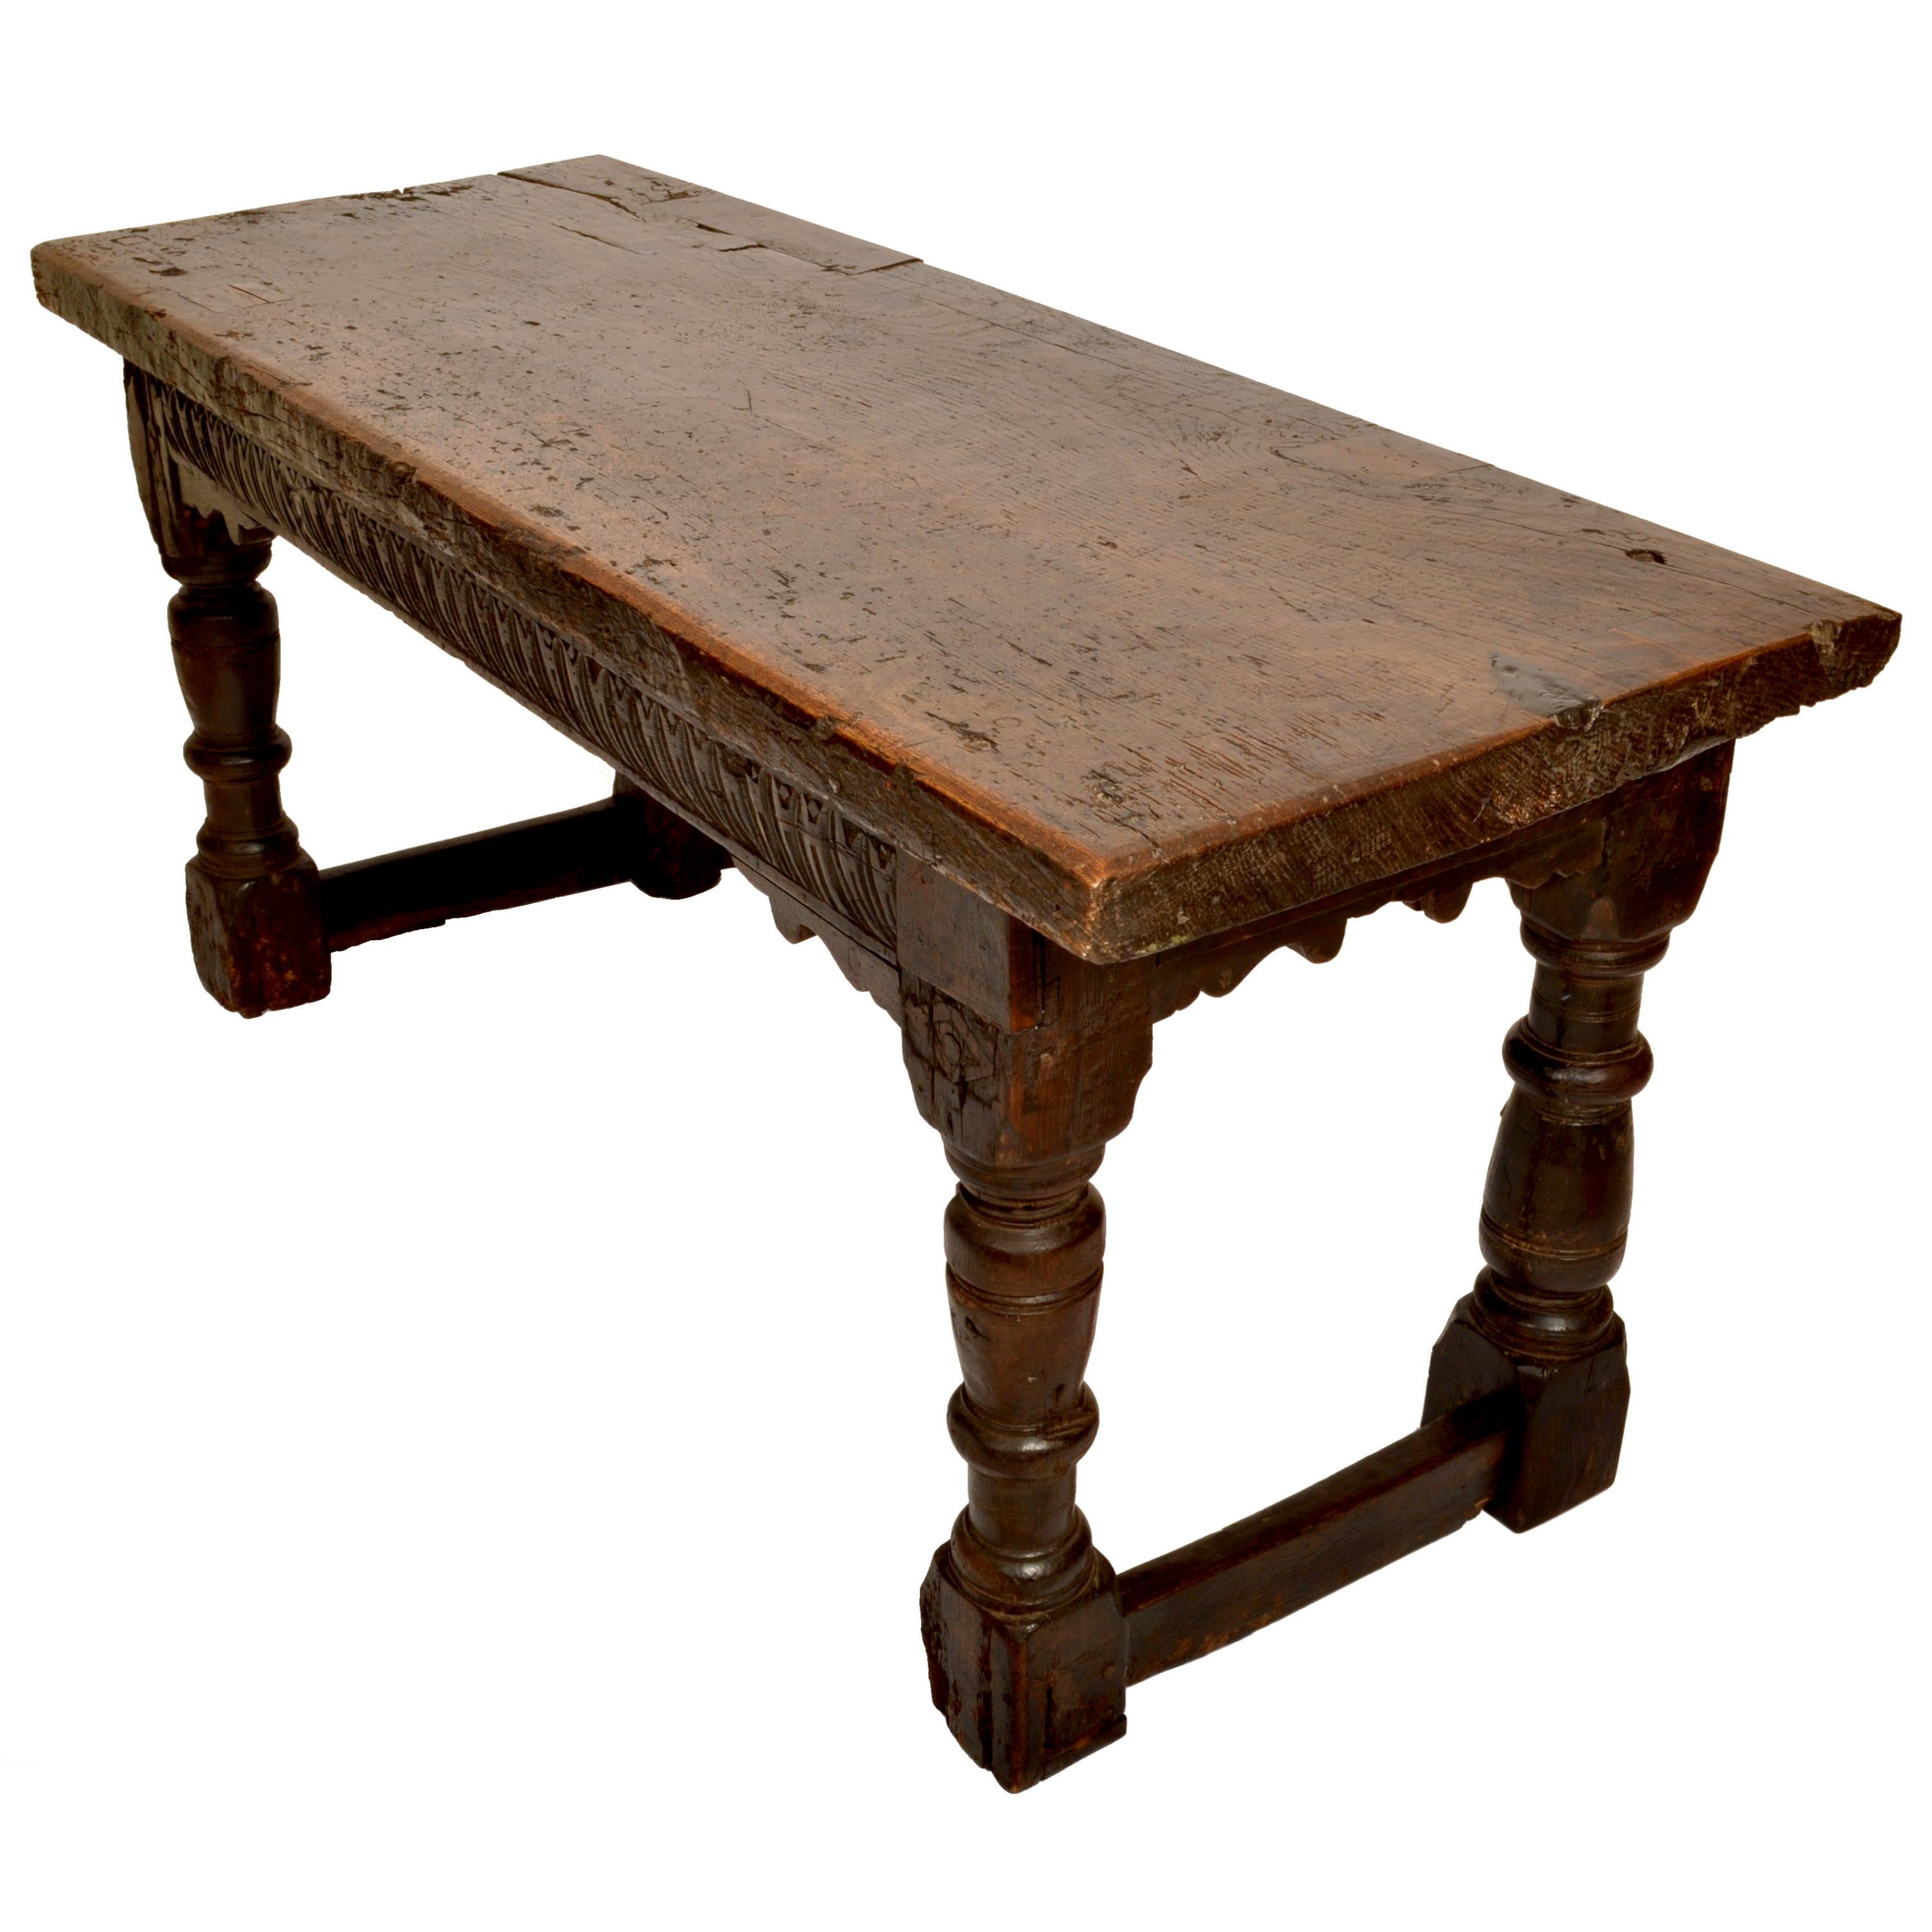 Antique 16th Century Elizabethan Tudor Carved Oak Dining Refectory Table, 1550 2